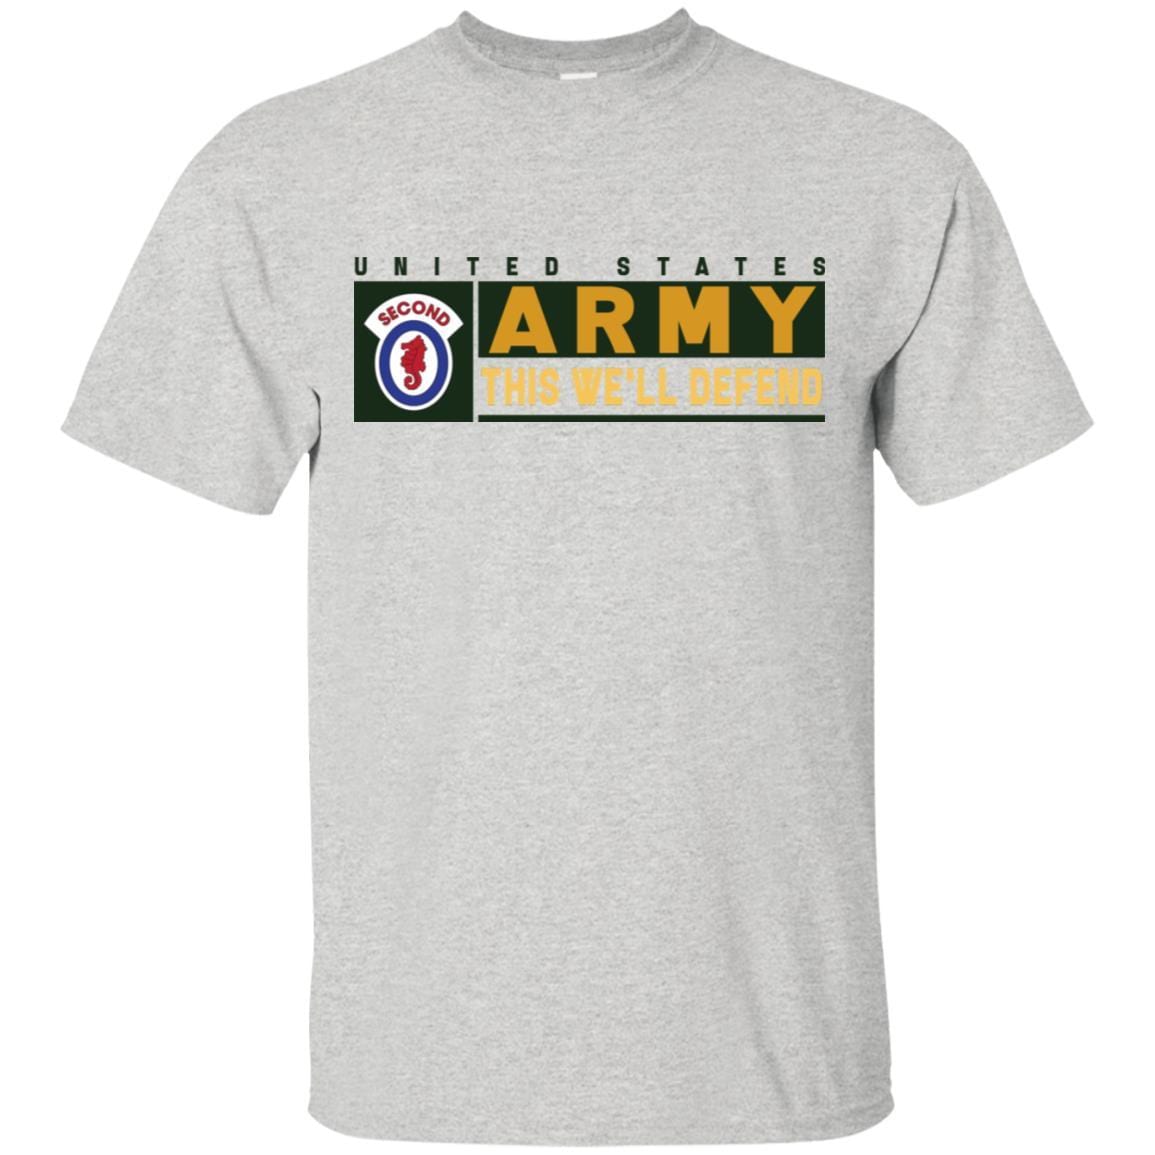 US Army 2ND ENGINEER BRIGADE- This We'll Defend T-Shirt On Front For Men-TShirt-Army-Veterans Nation